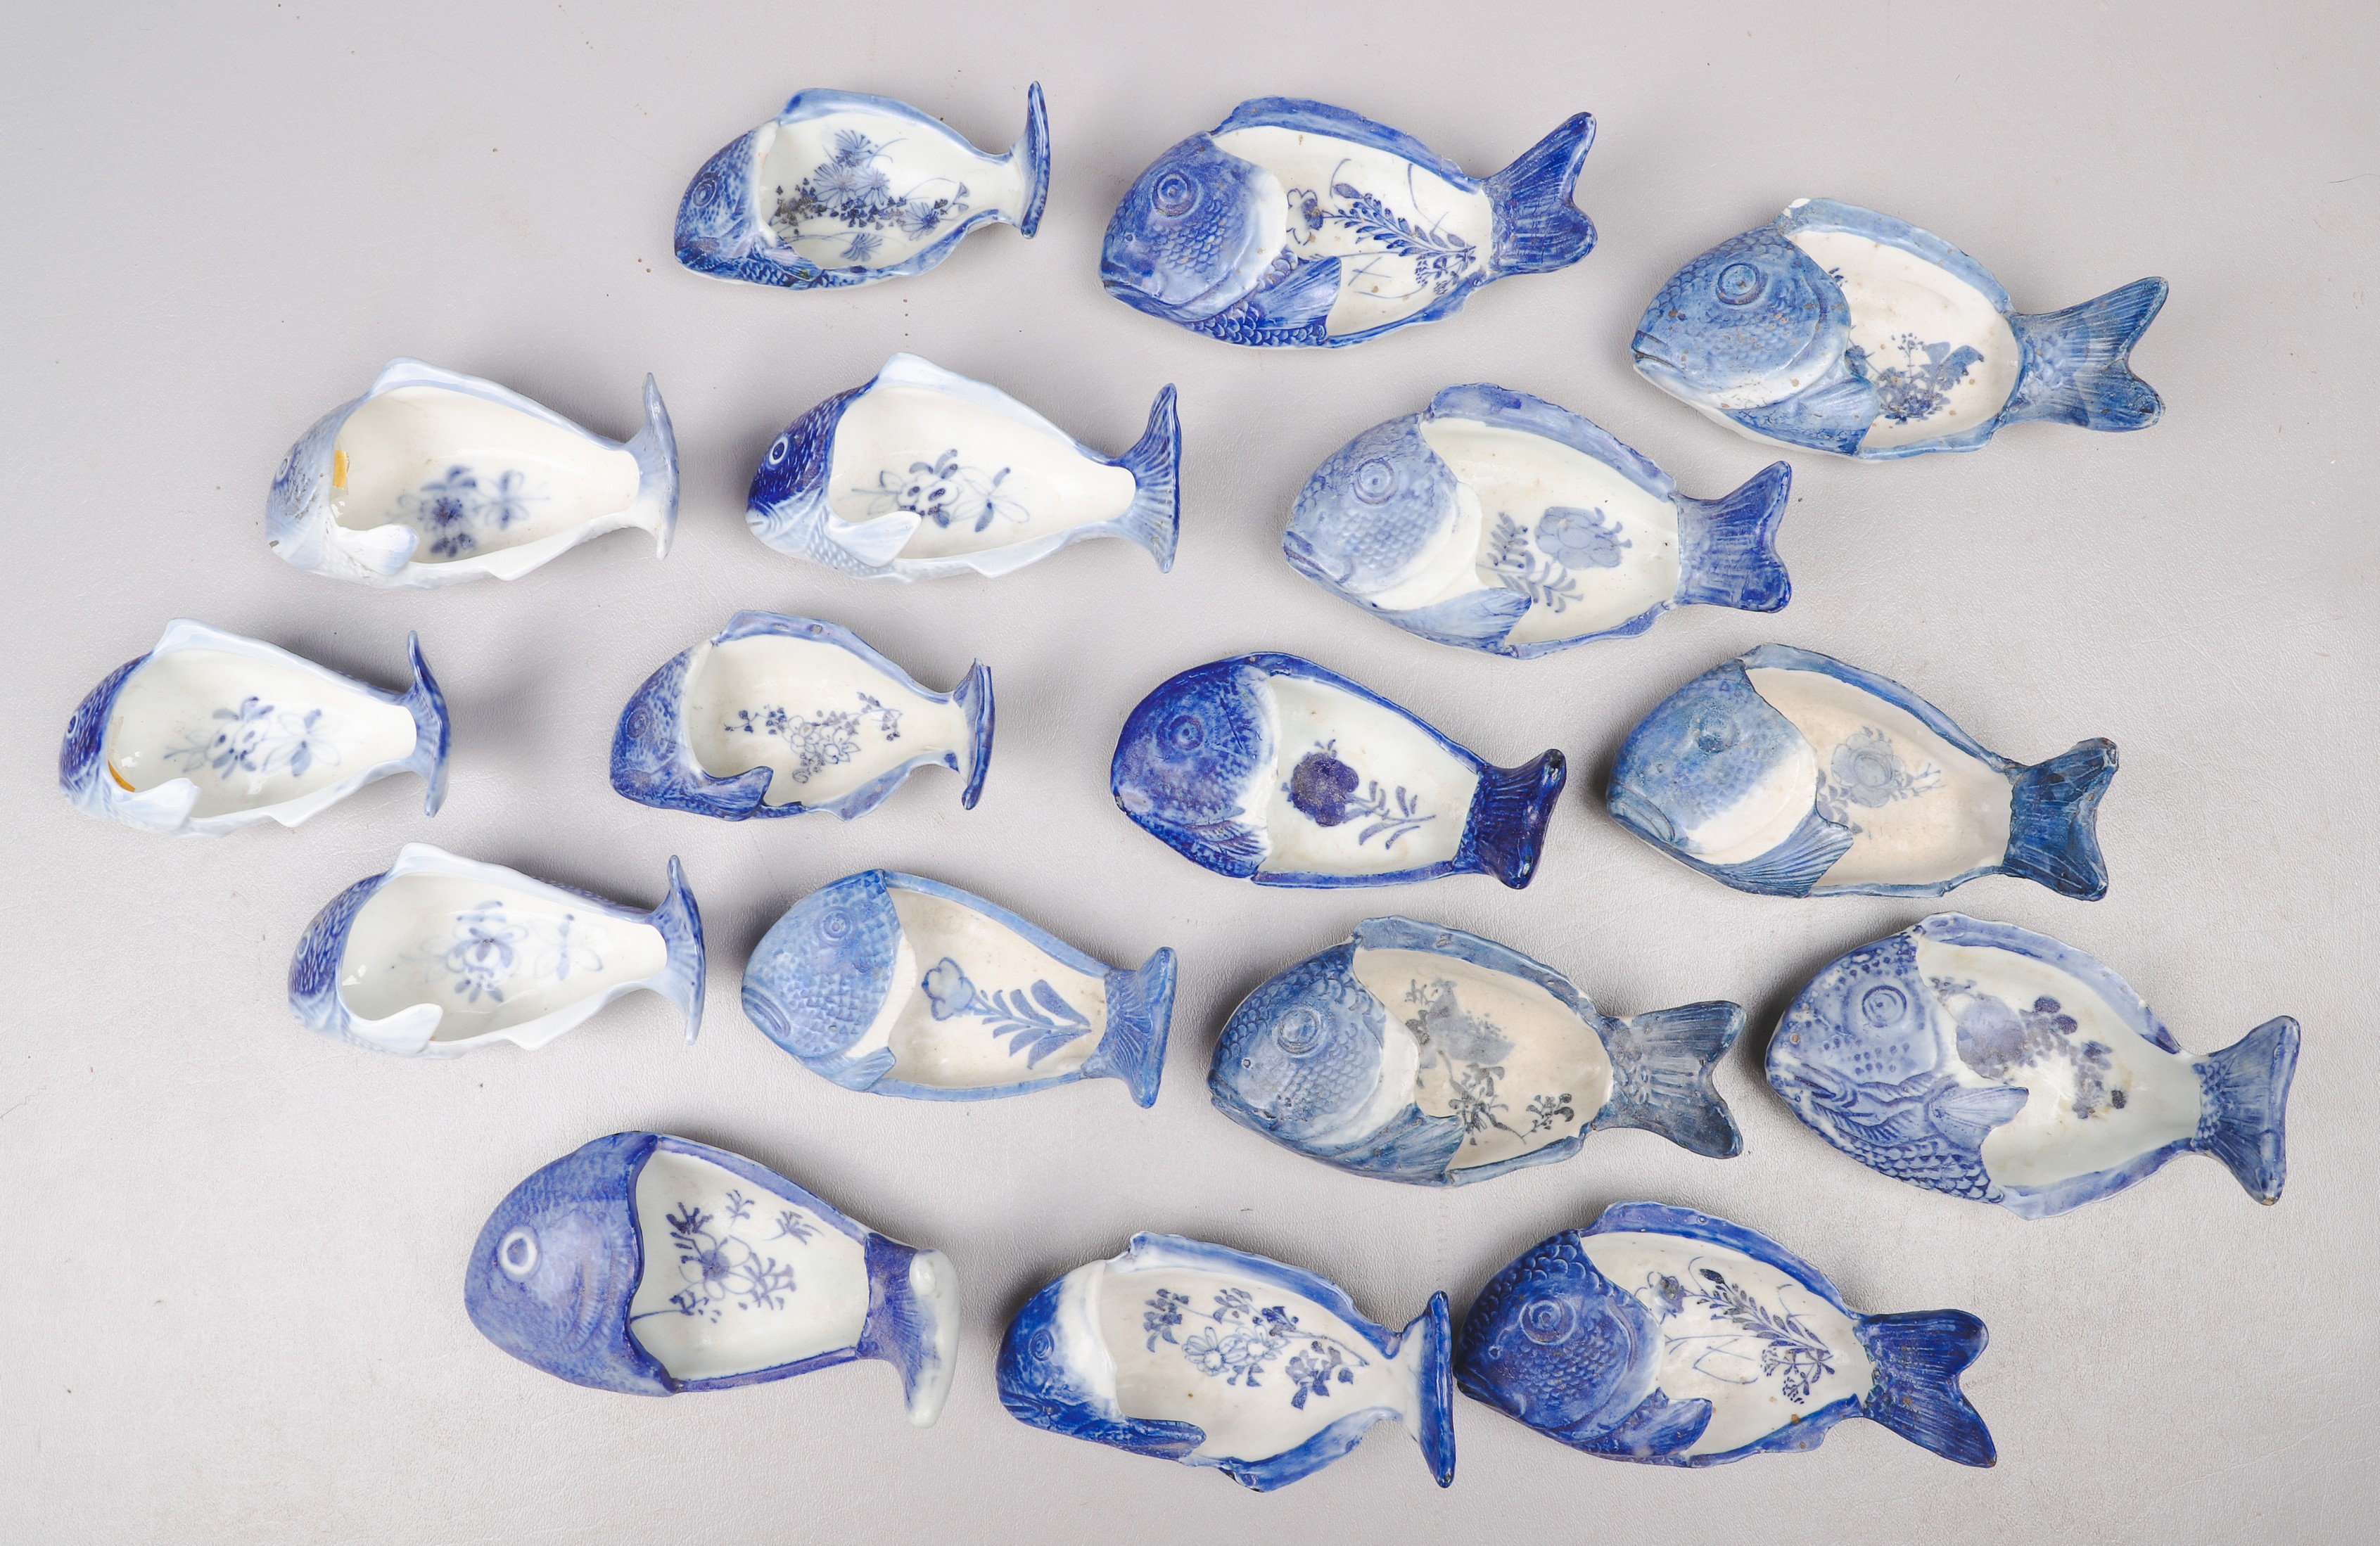  17 Chinese porcelain fish form 2e08be